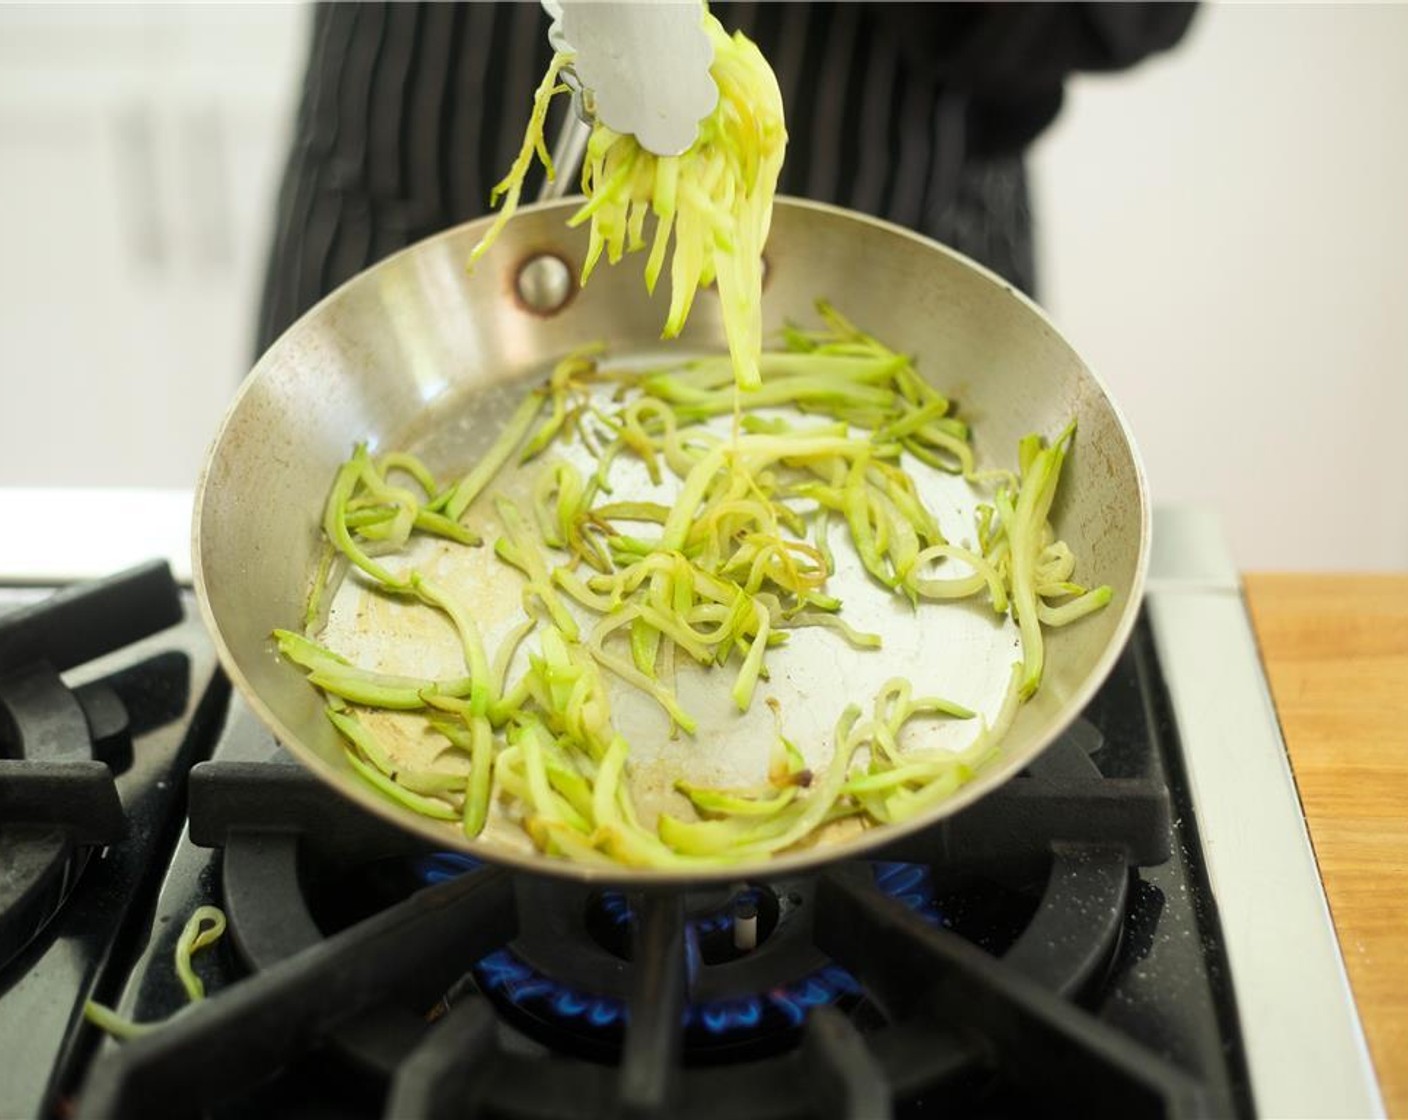 step 16 Meanwhile, heat a small saute pan over medium heat with Olive Oil (1 Tbsp). Add chayote squash, Salt (1/2 tsp), Ground Black Pepper (1/4 tsp), and cook for 3 minutes.